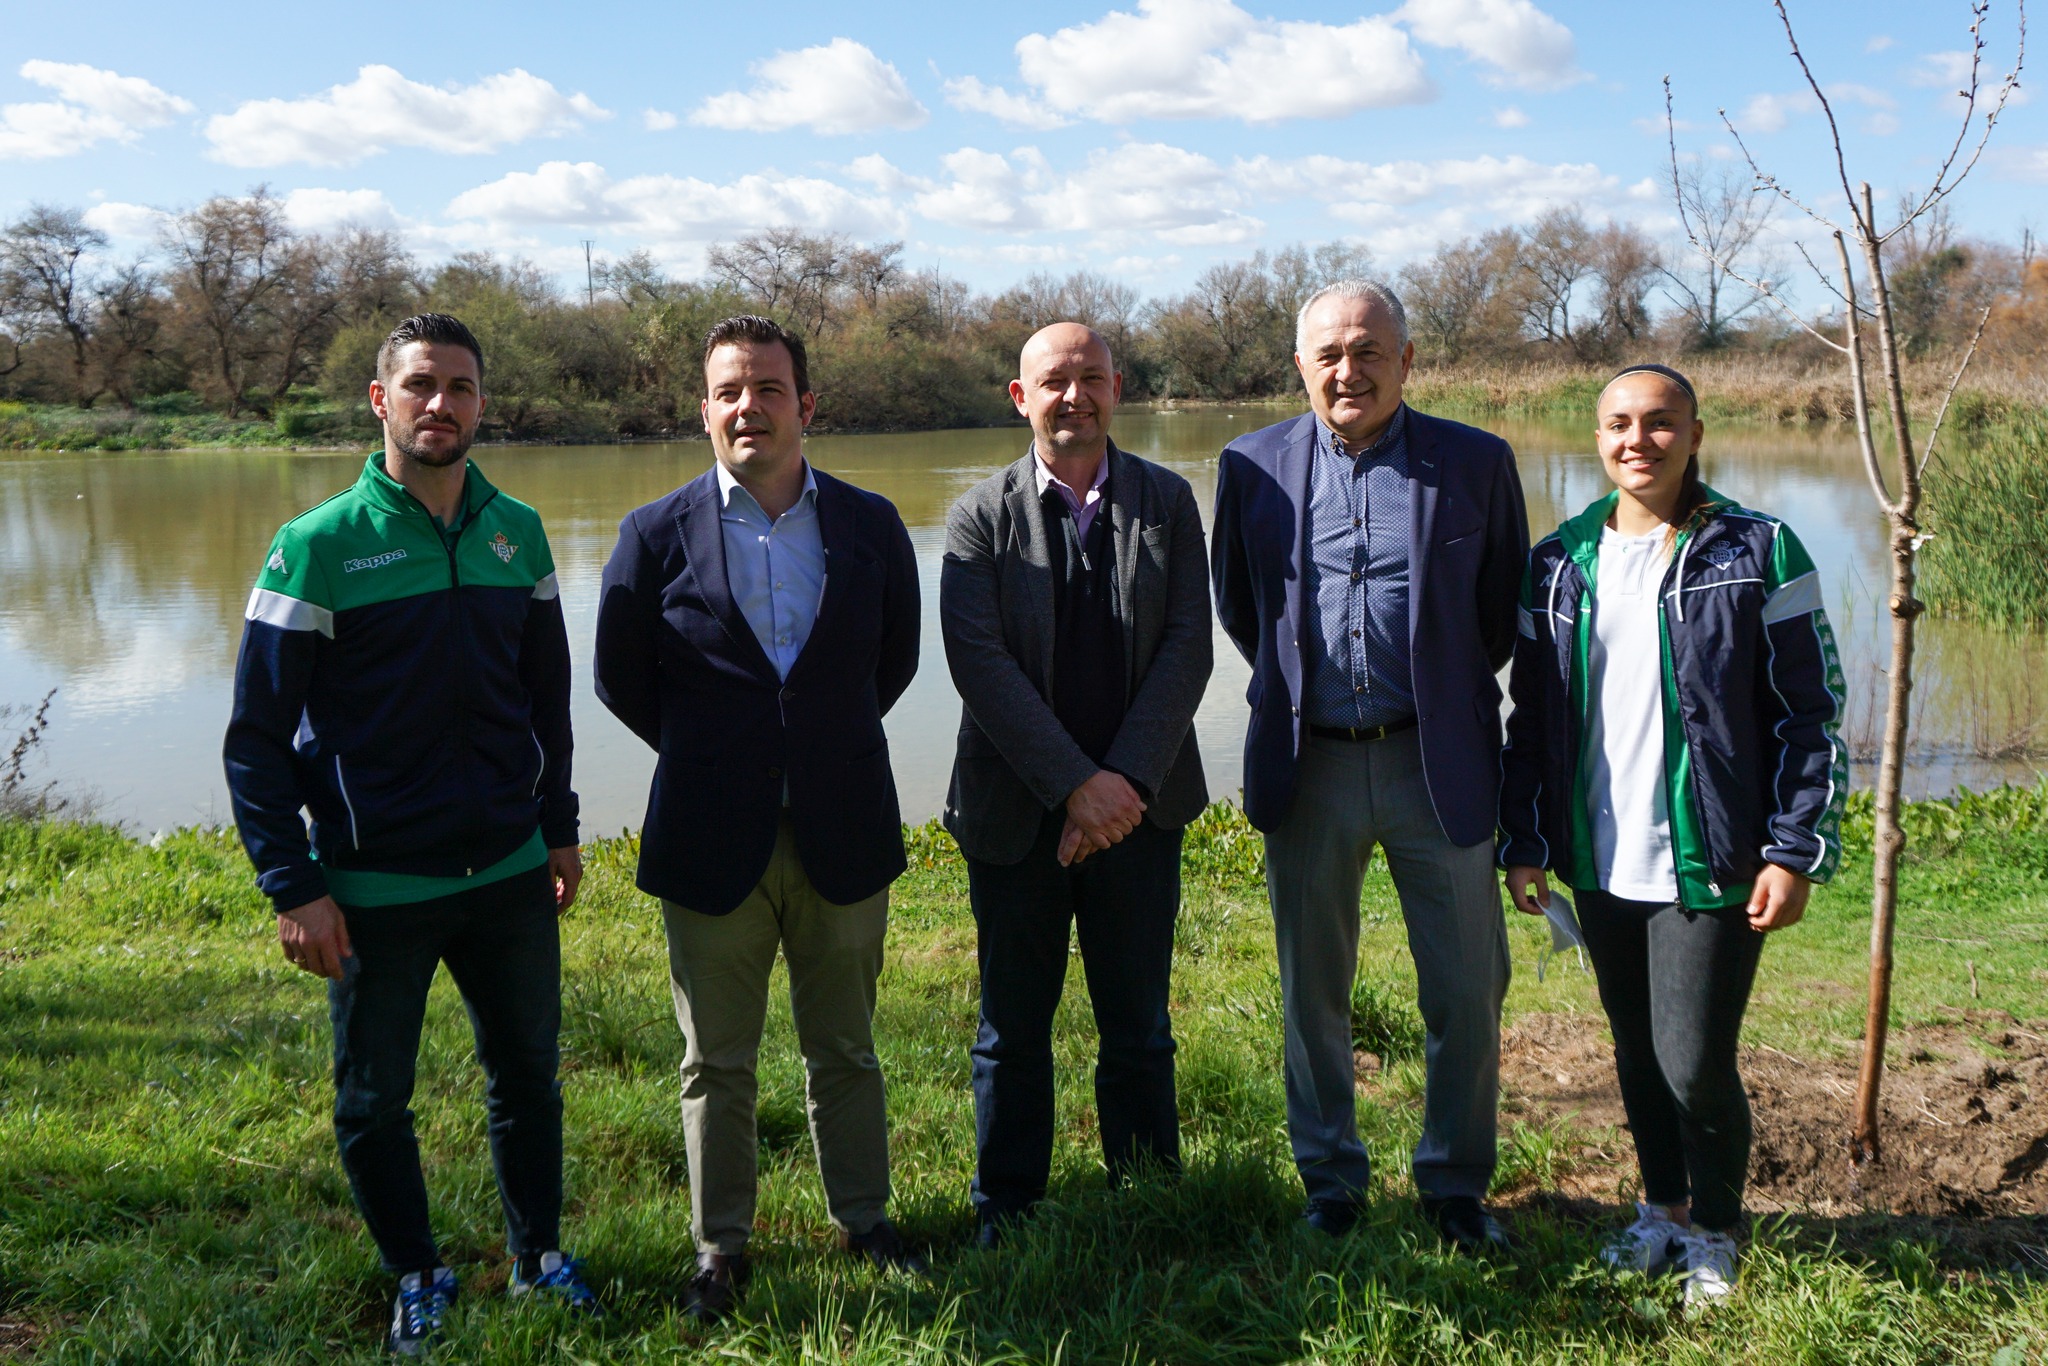 Real Betis and Ecoterrae join forces to respond to major global sustainability challenges